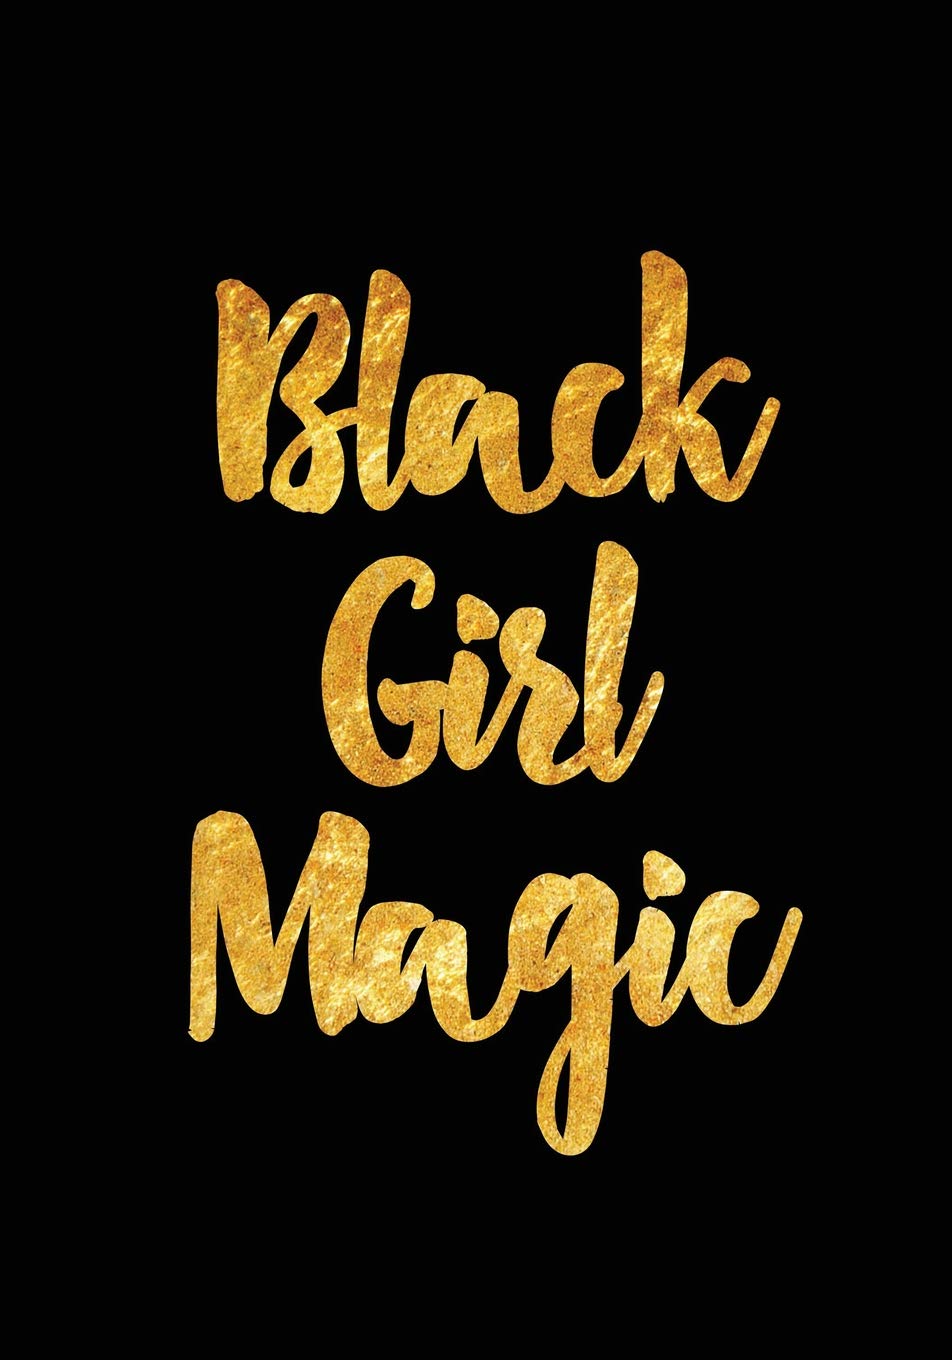 Black Girl Magic: Gold Textured Notebook Journal Diary, African American Notebook, Black History Month Journal, Black Pride Notebook, Black Lives Matter Book, Melanin Notebook: For Everyone, Journals: 9781986115834: Books